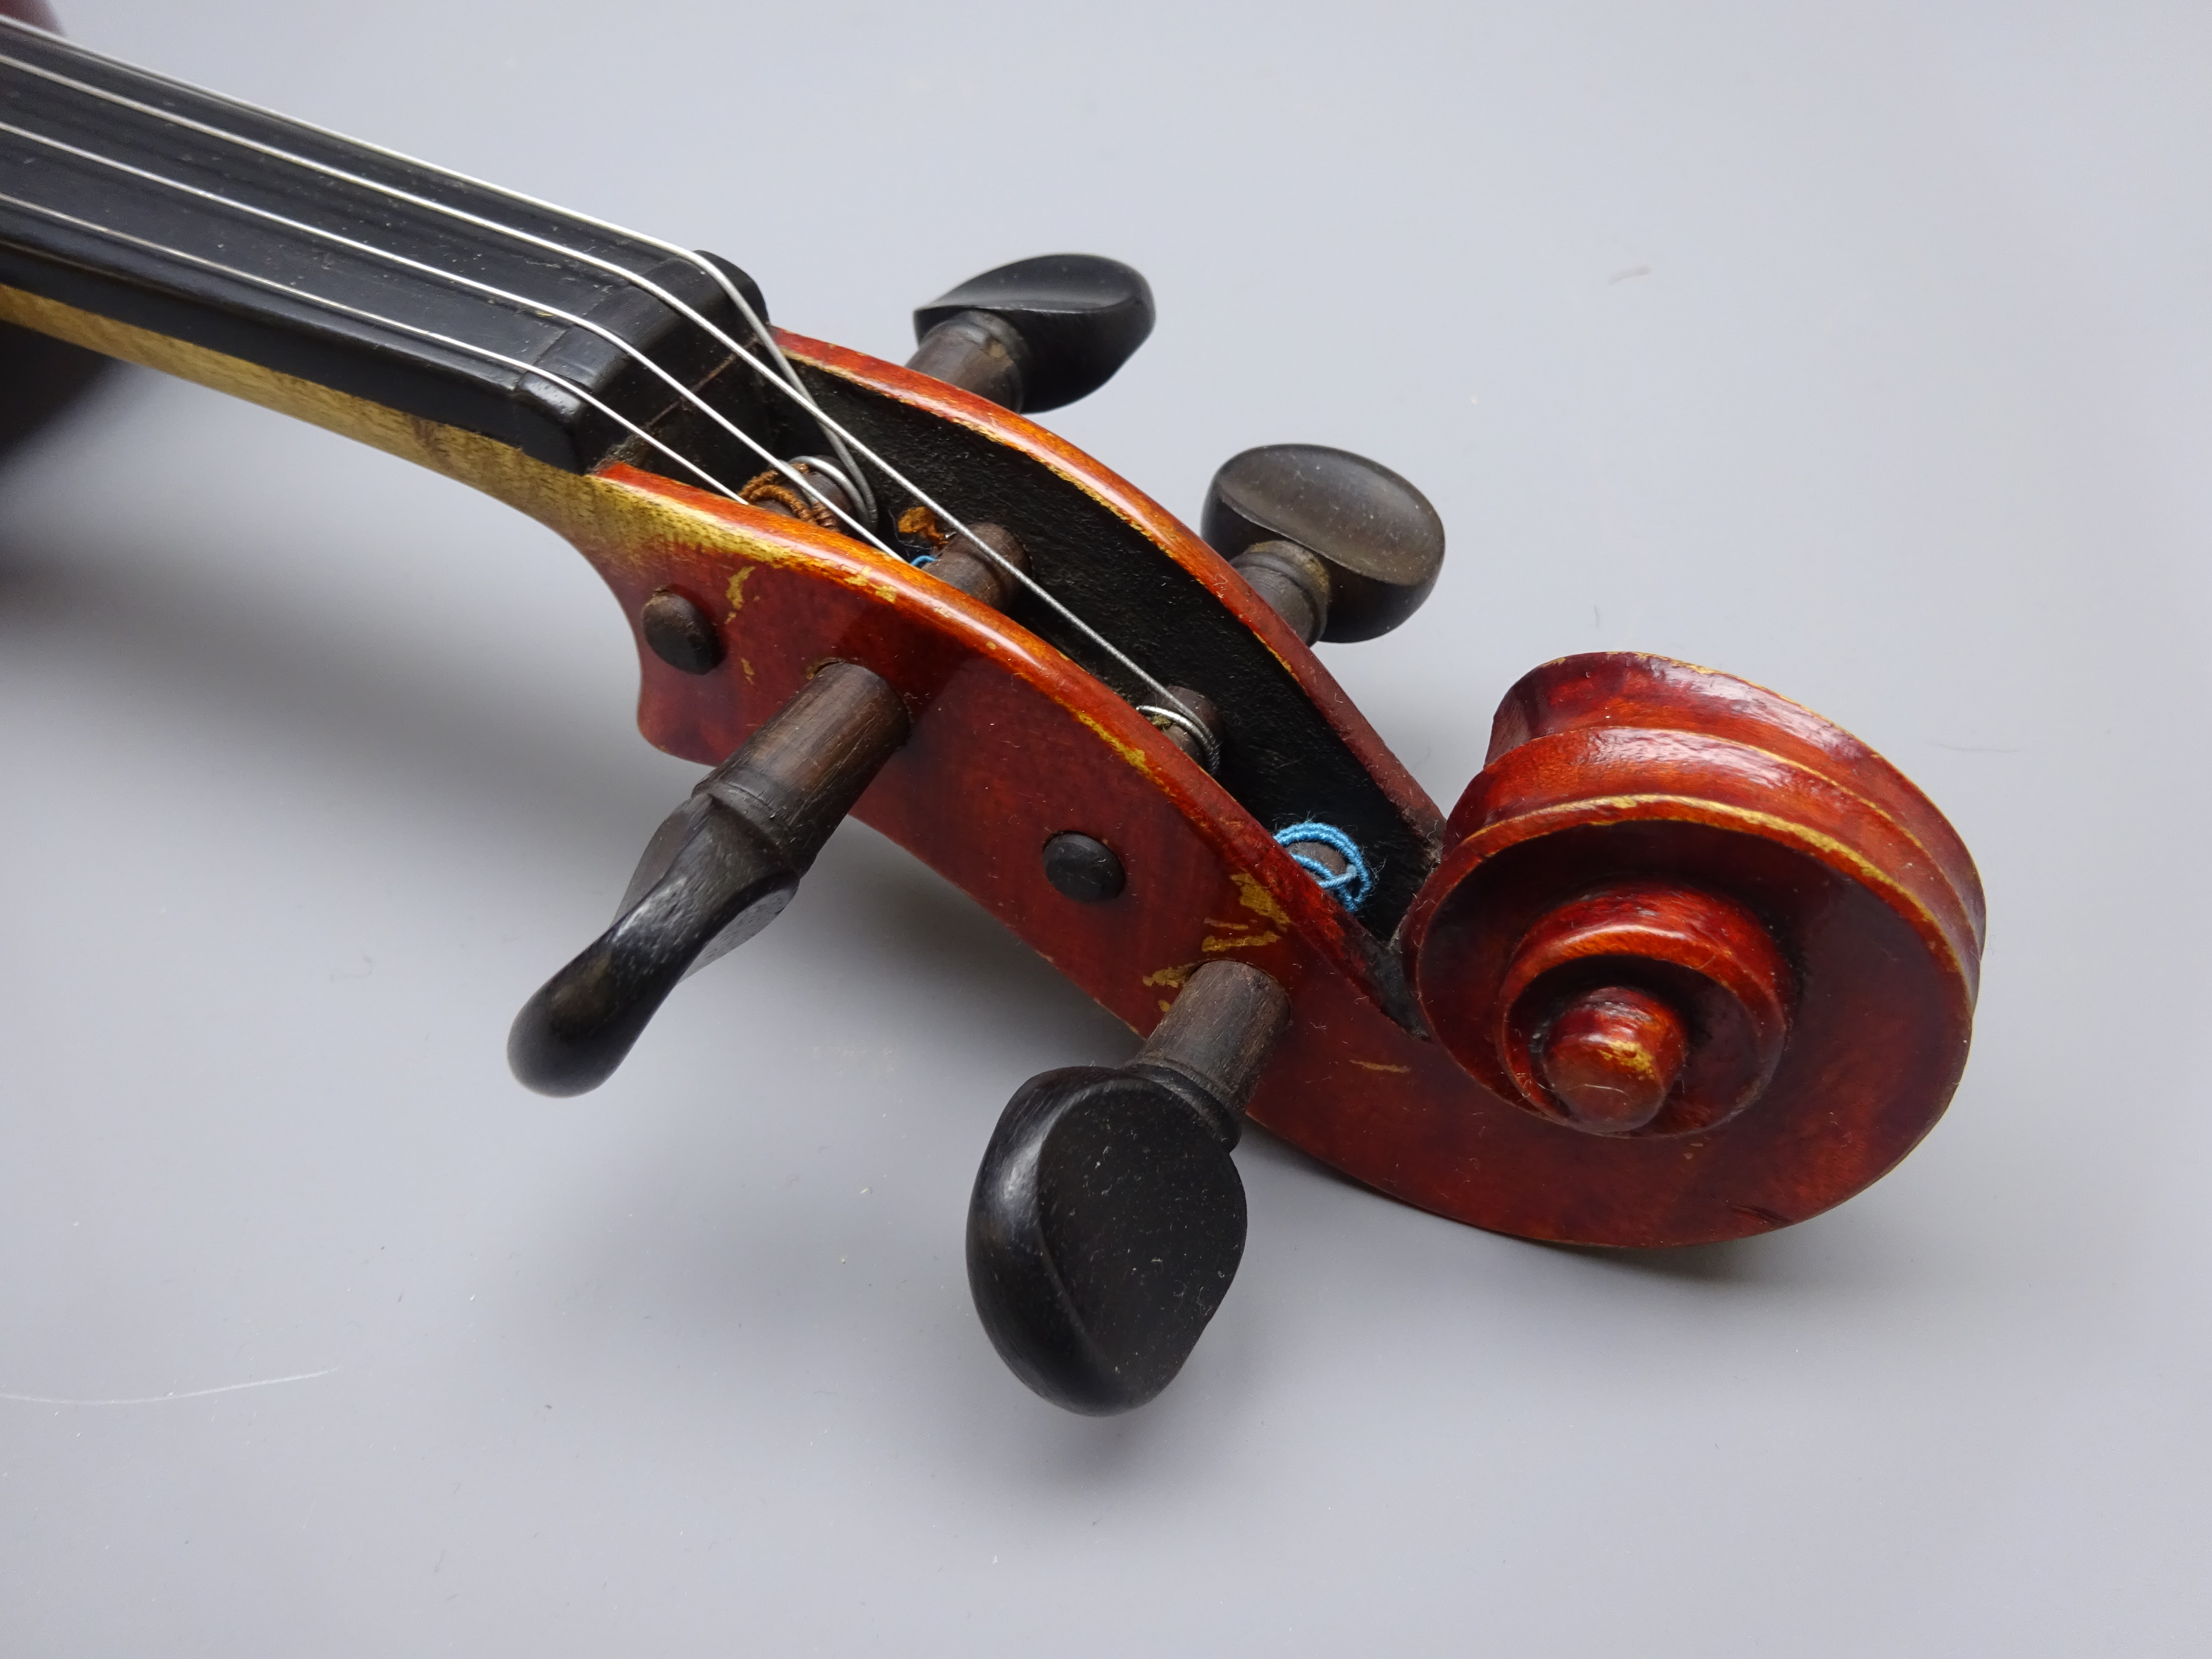 Early 20th century violin, French or German, with 36cm one-piece maple back and ribs and spruce top, - Image 5 of 9